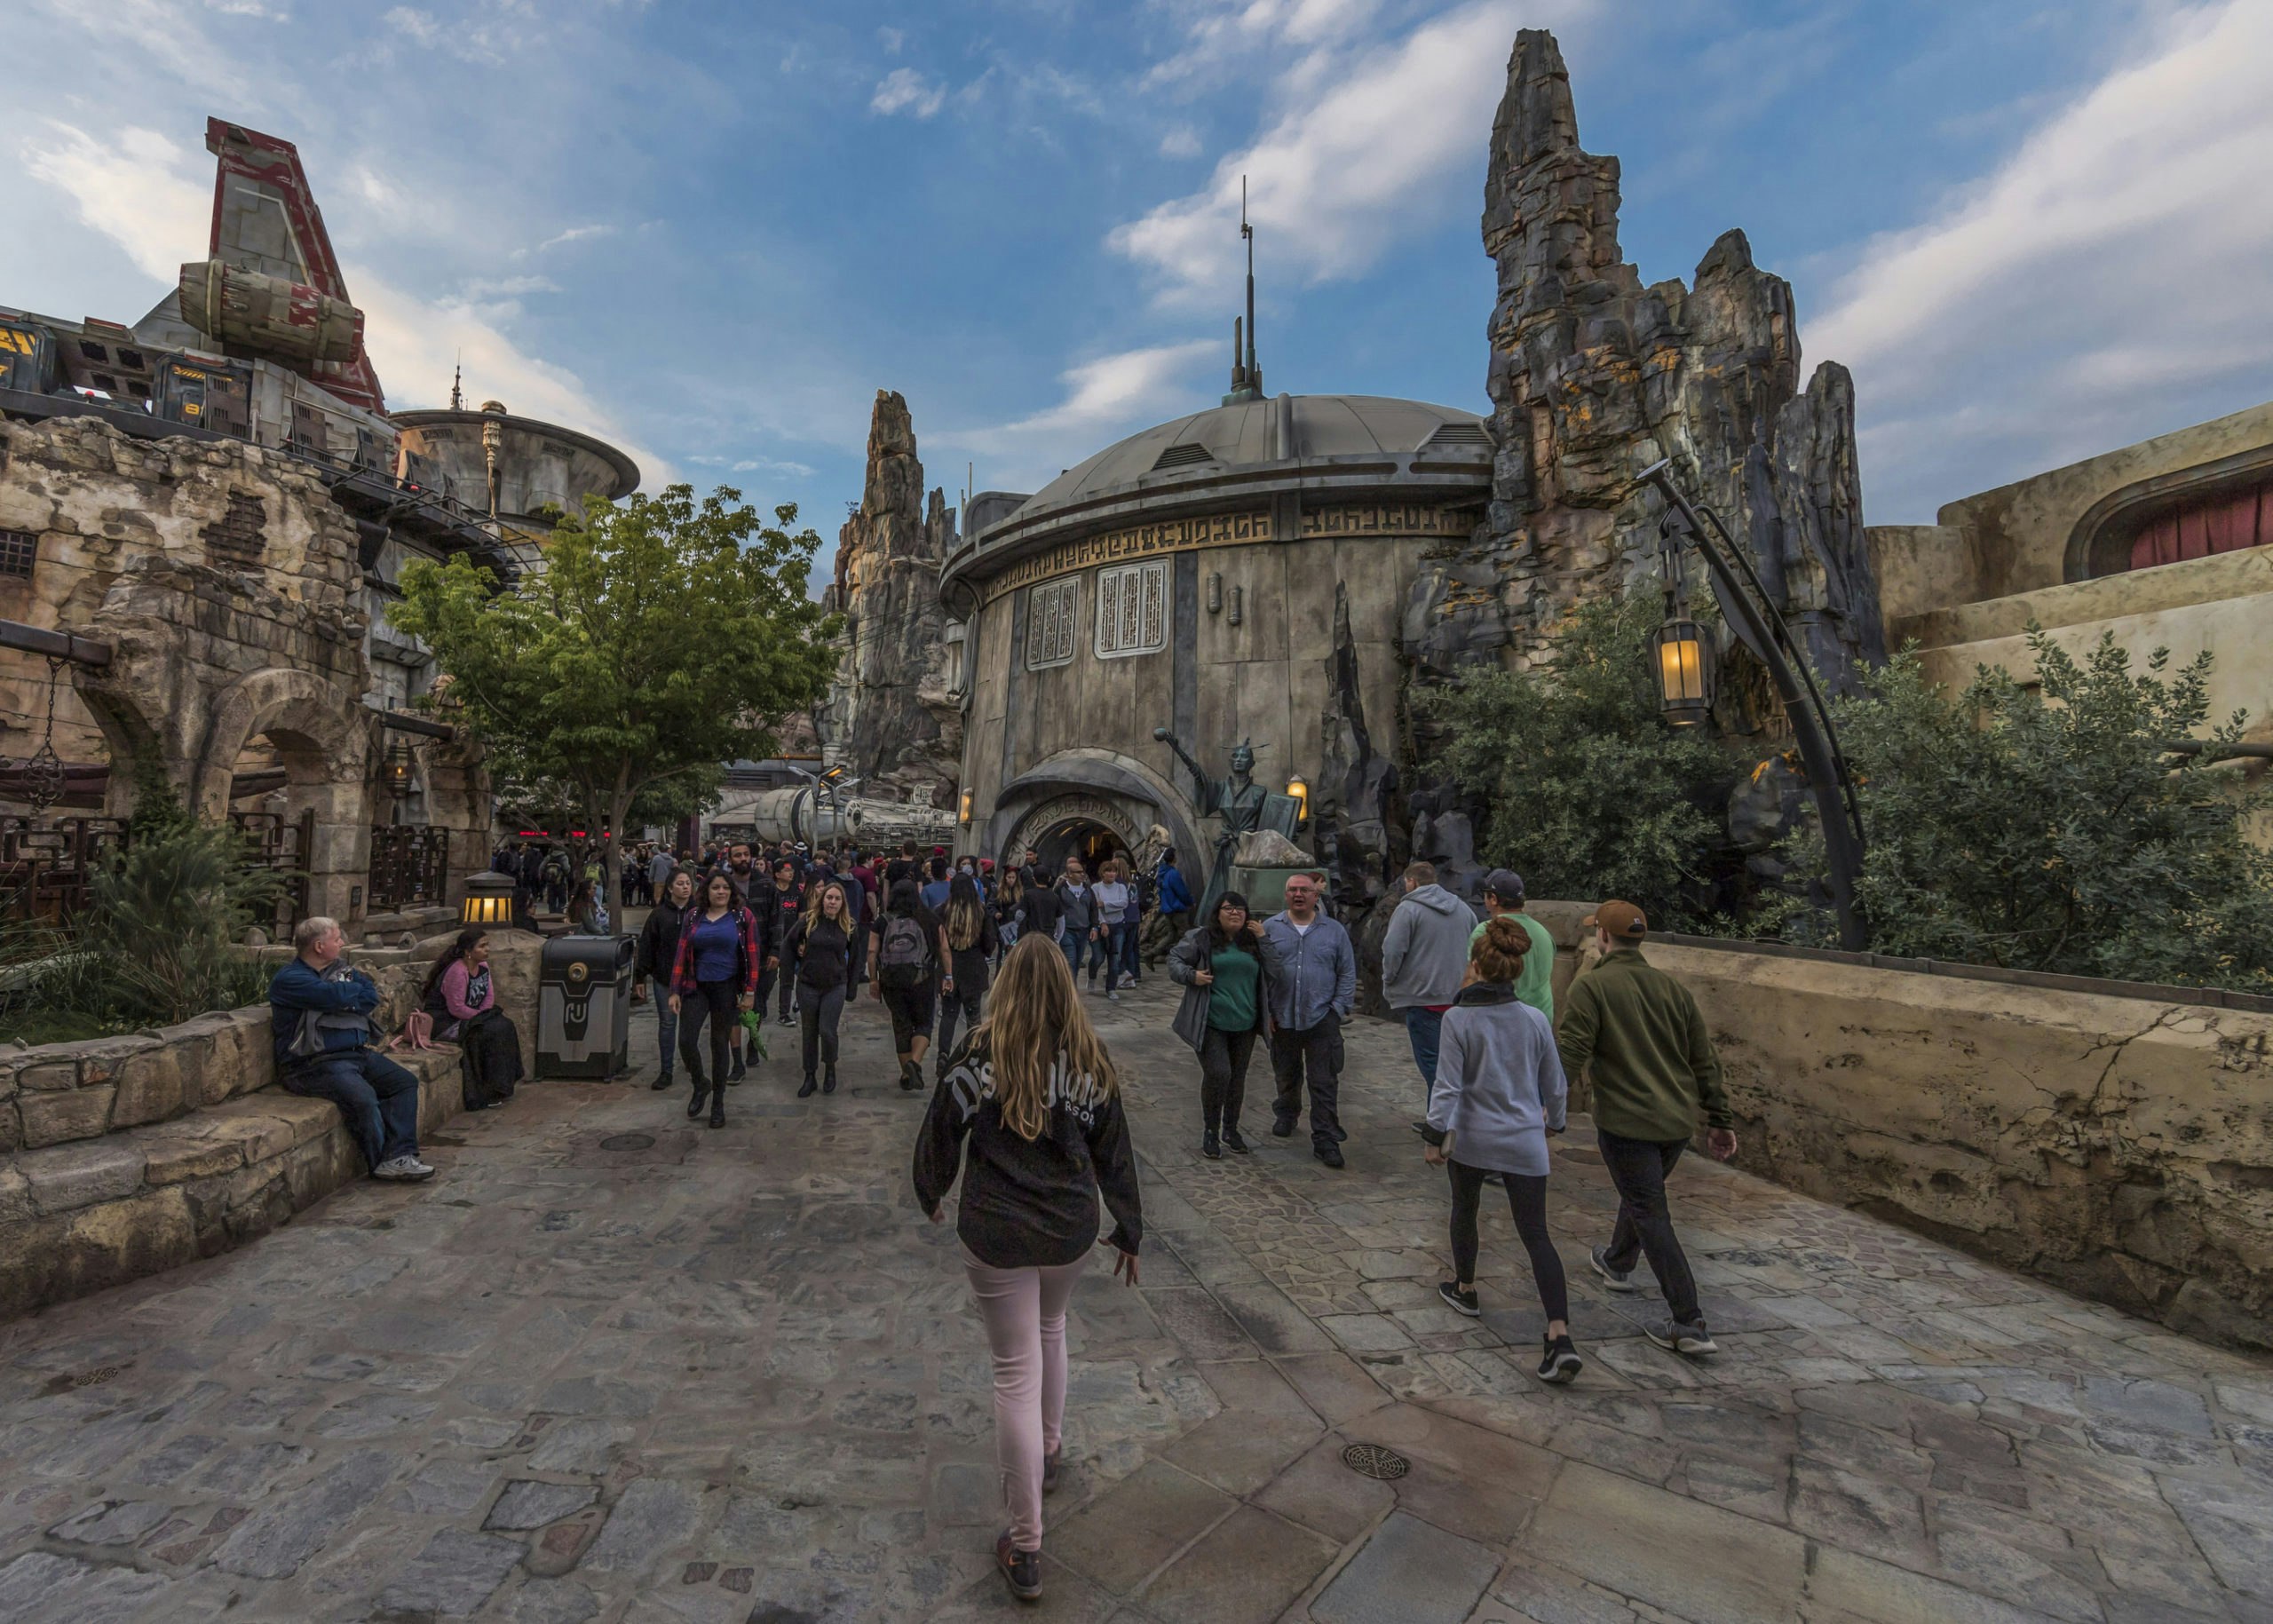 Guests wander through a replica of Black Spire Outpost, a village on the planet of Batuu, at Disneyland